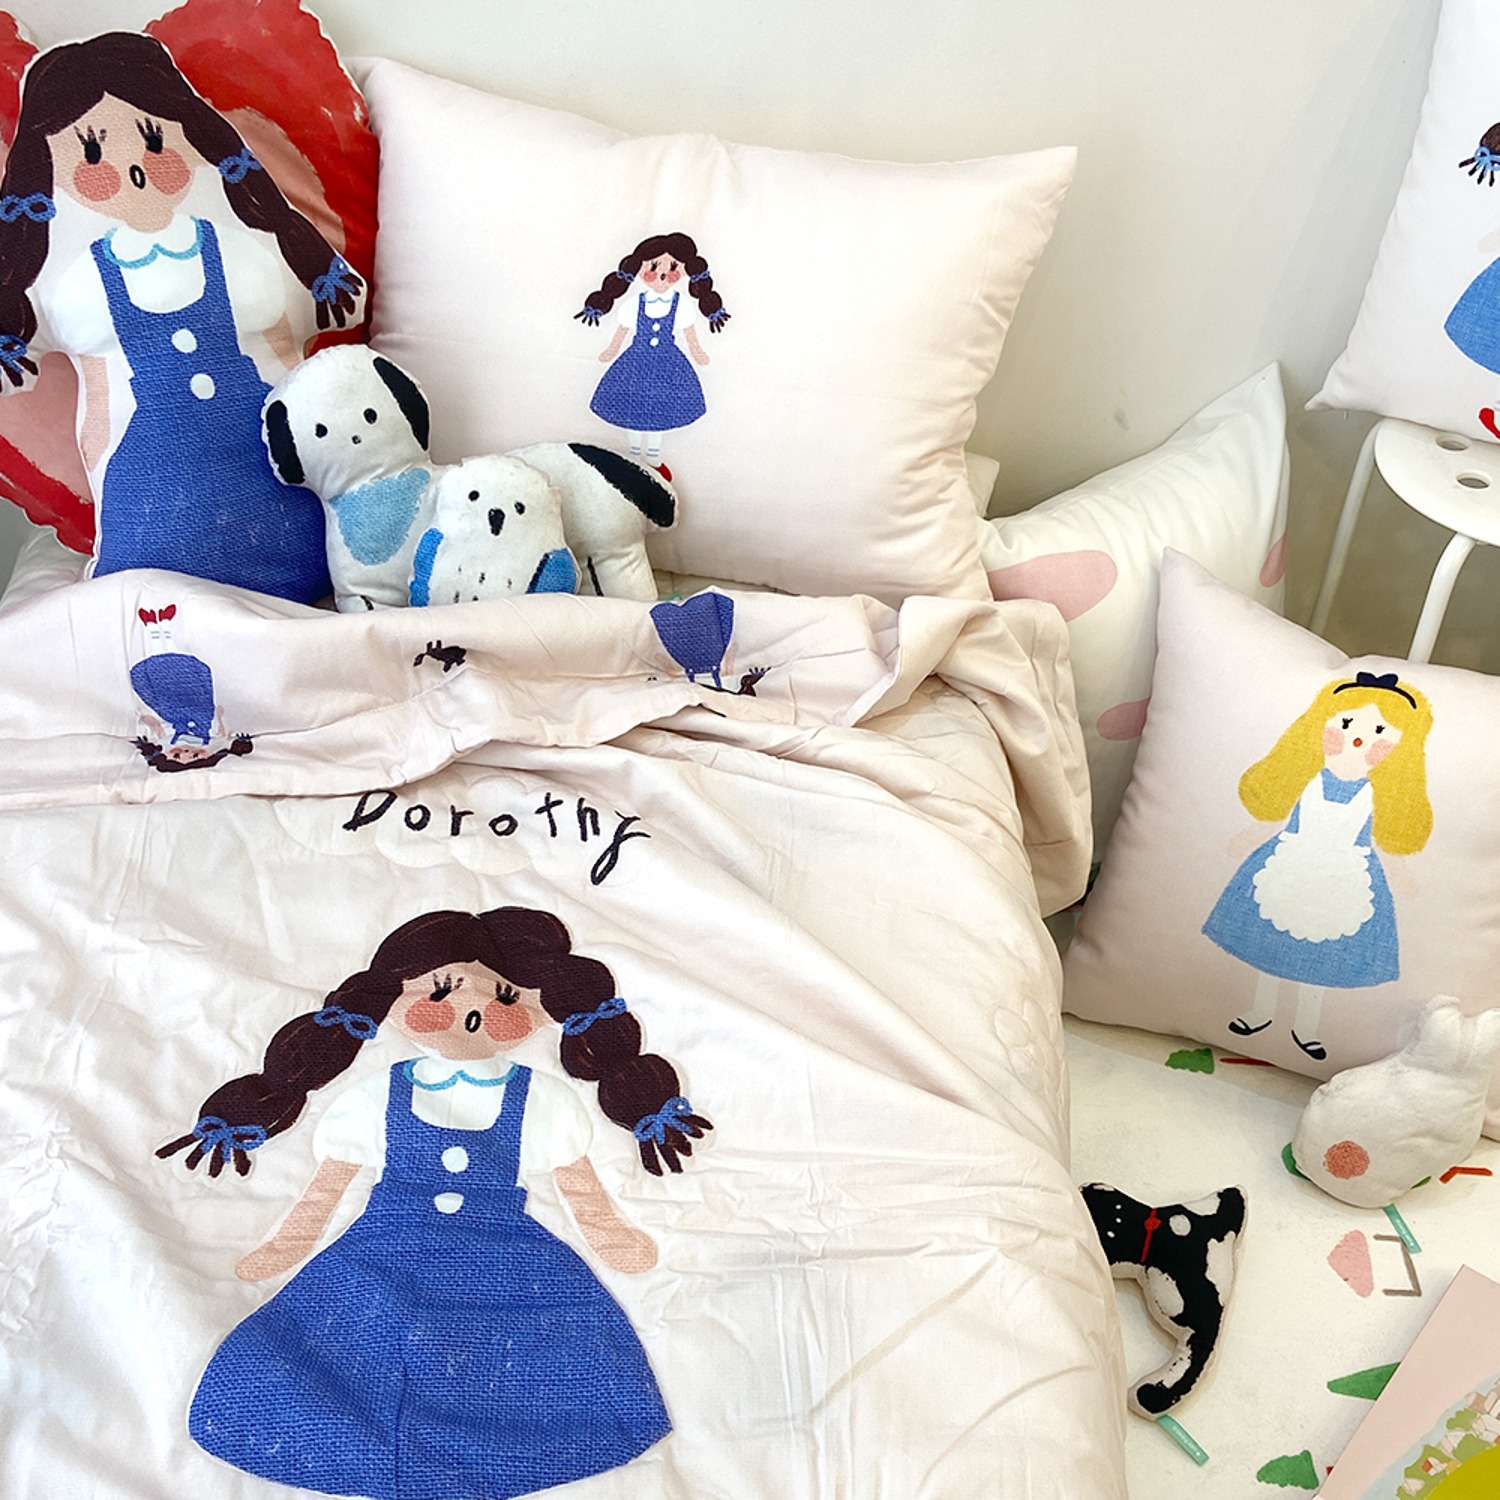 [drawing AMY] Dorothy summer bed comforter set